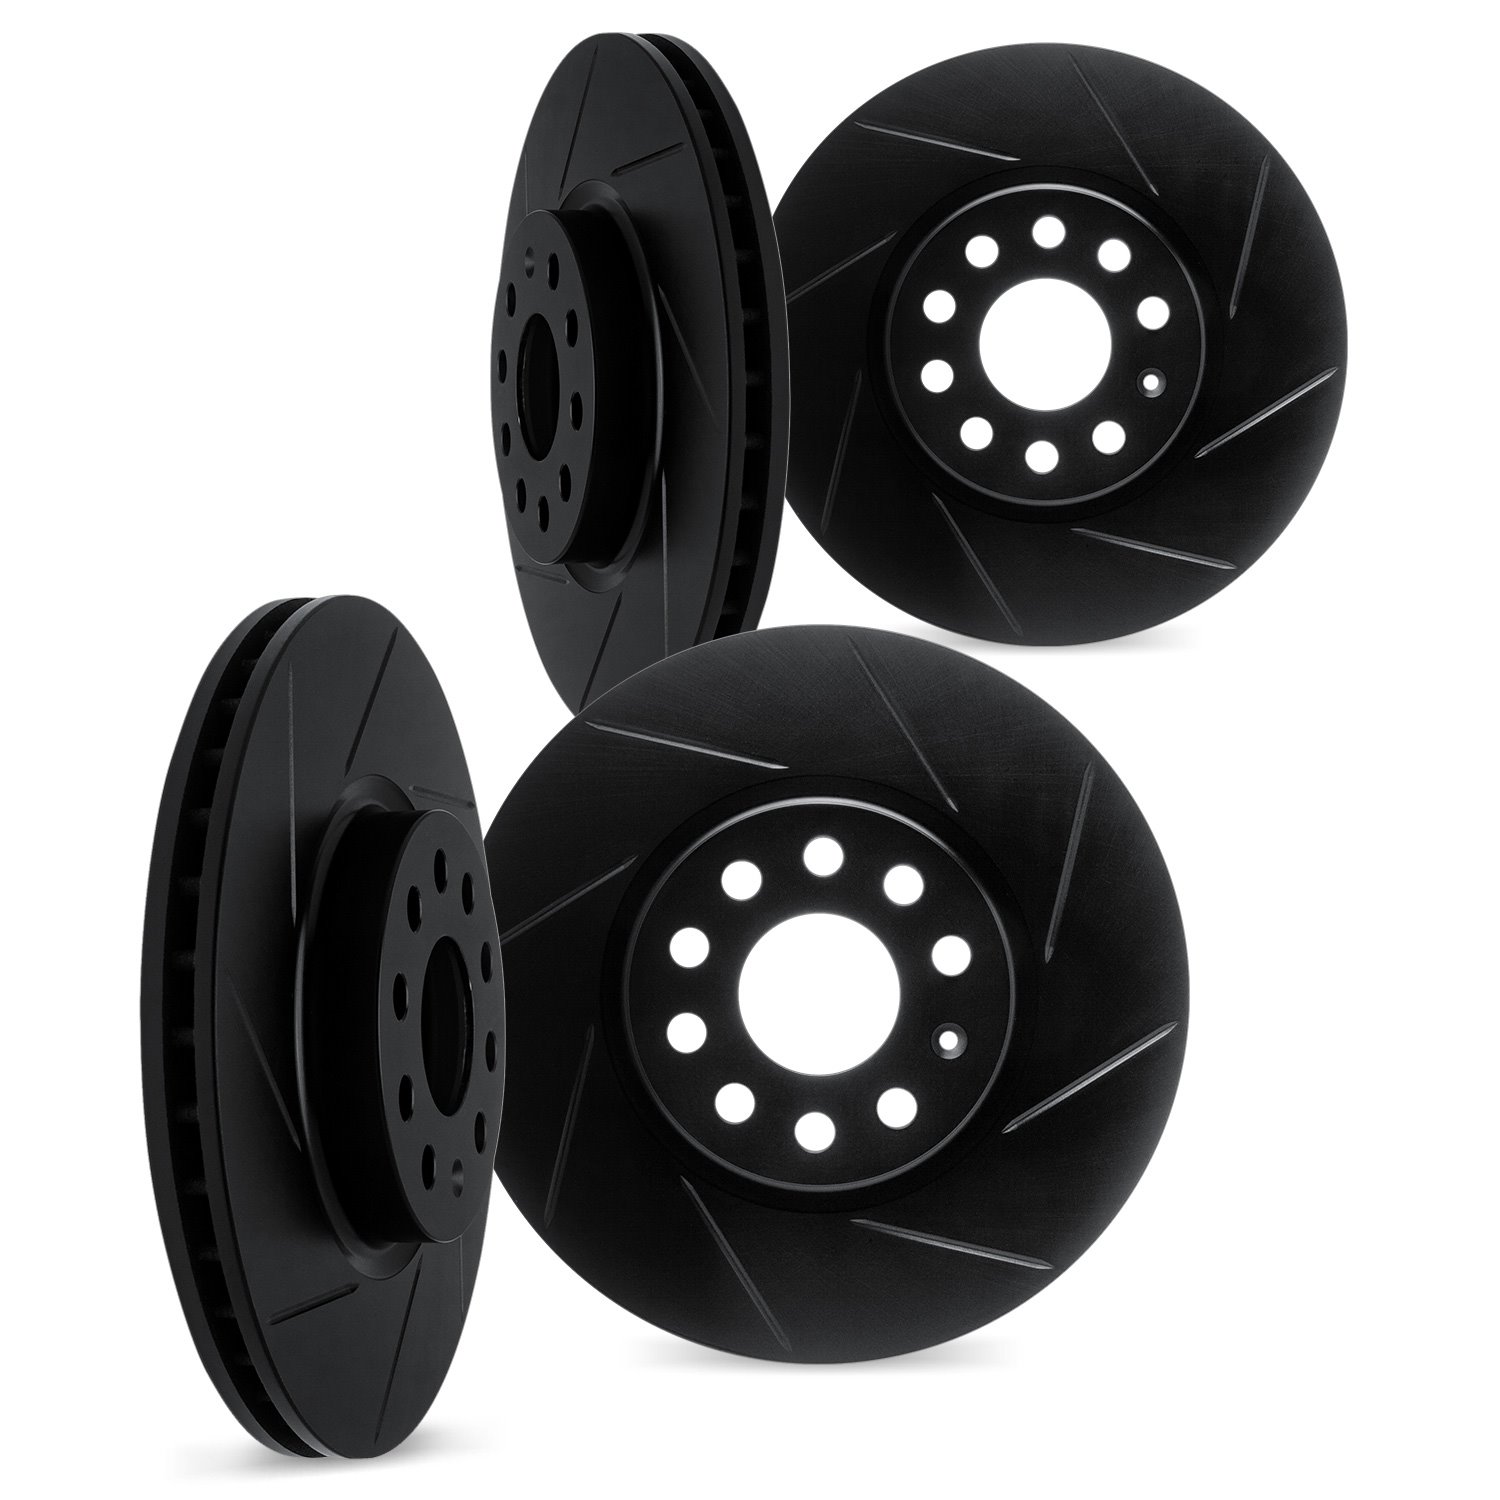 3004-31084 Slotted Brake Rotors [Black], Fits Select Multiple Makes/Models, Position: Front and Rear